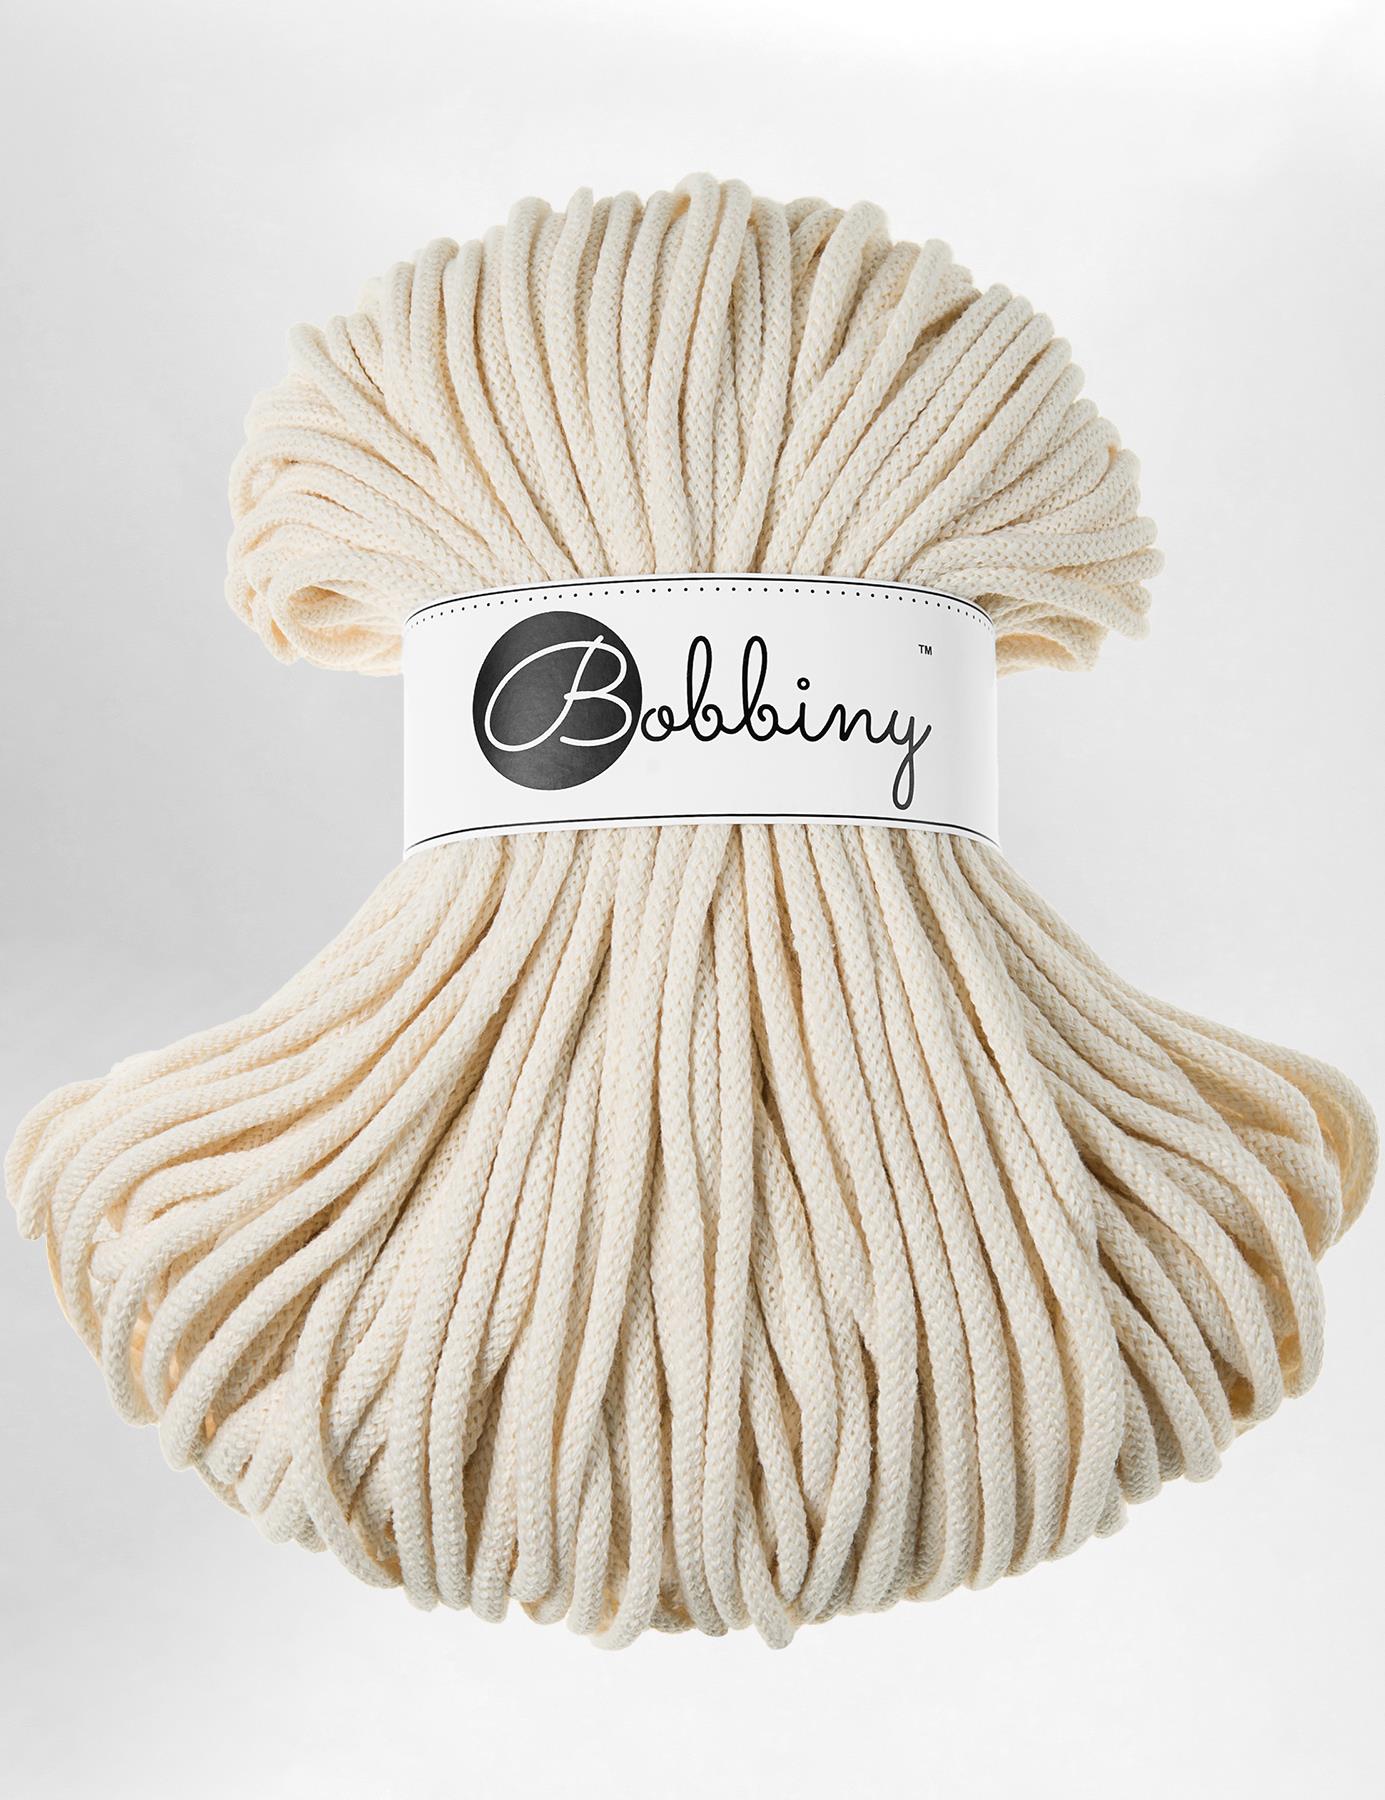 5mm Natural recycled cotton macrame cord by Bobbiny (100m) – Jolly